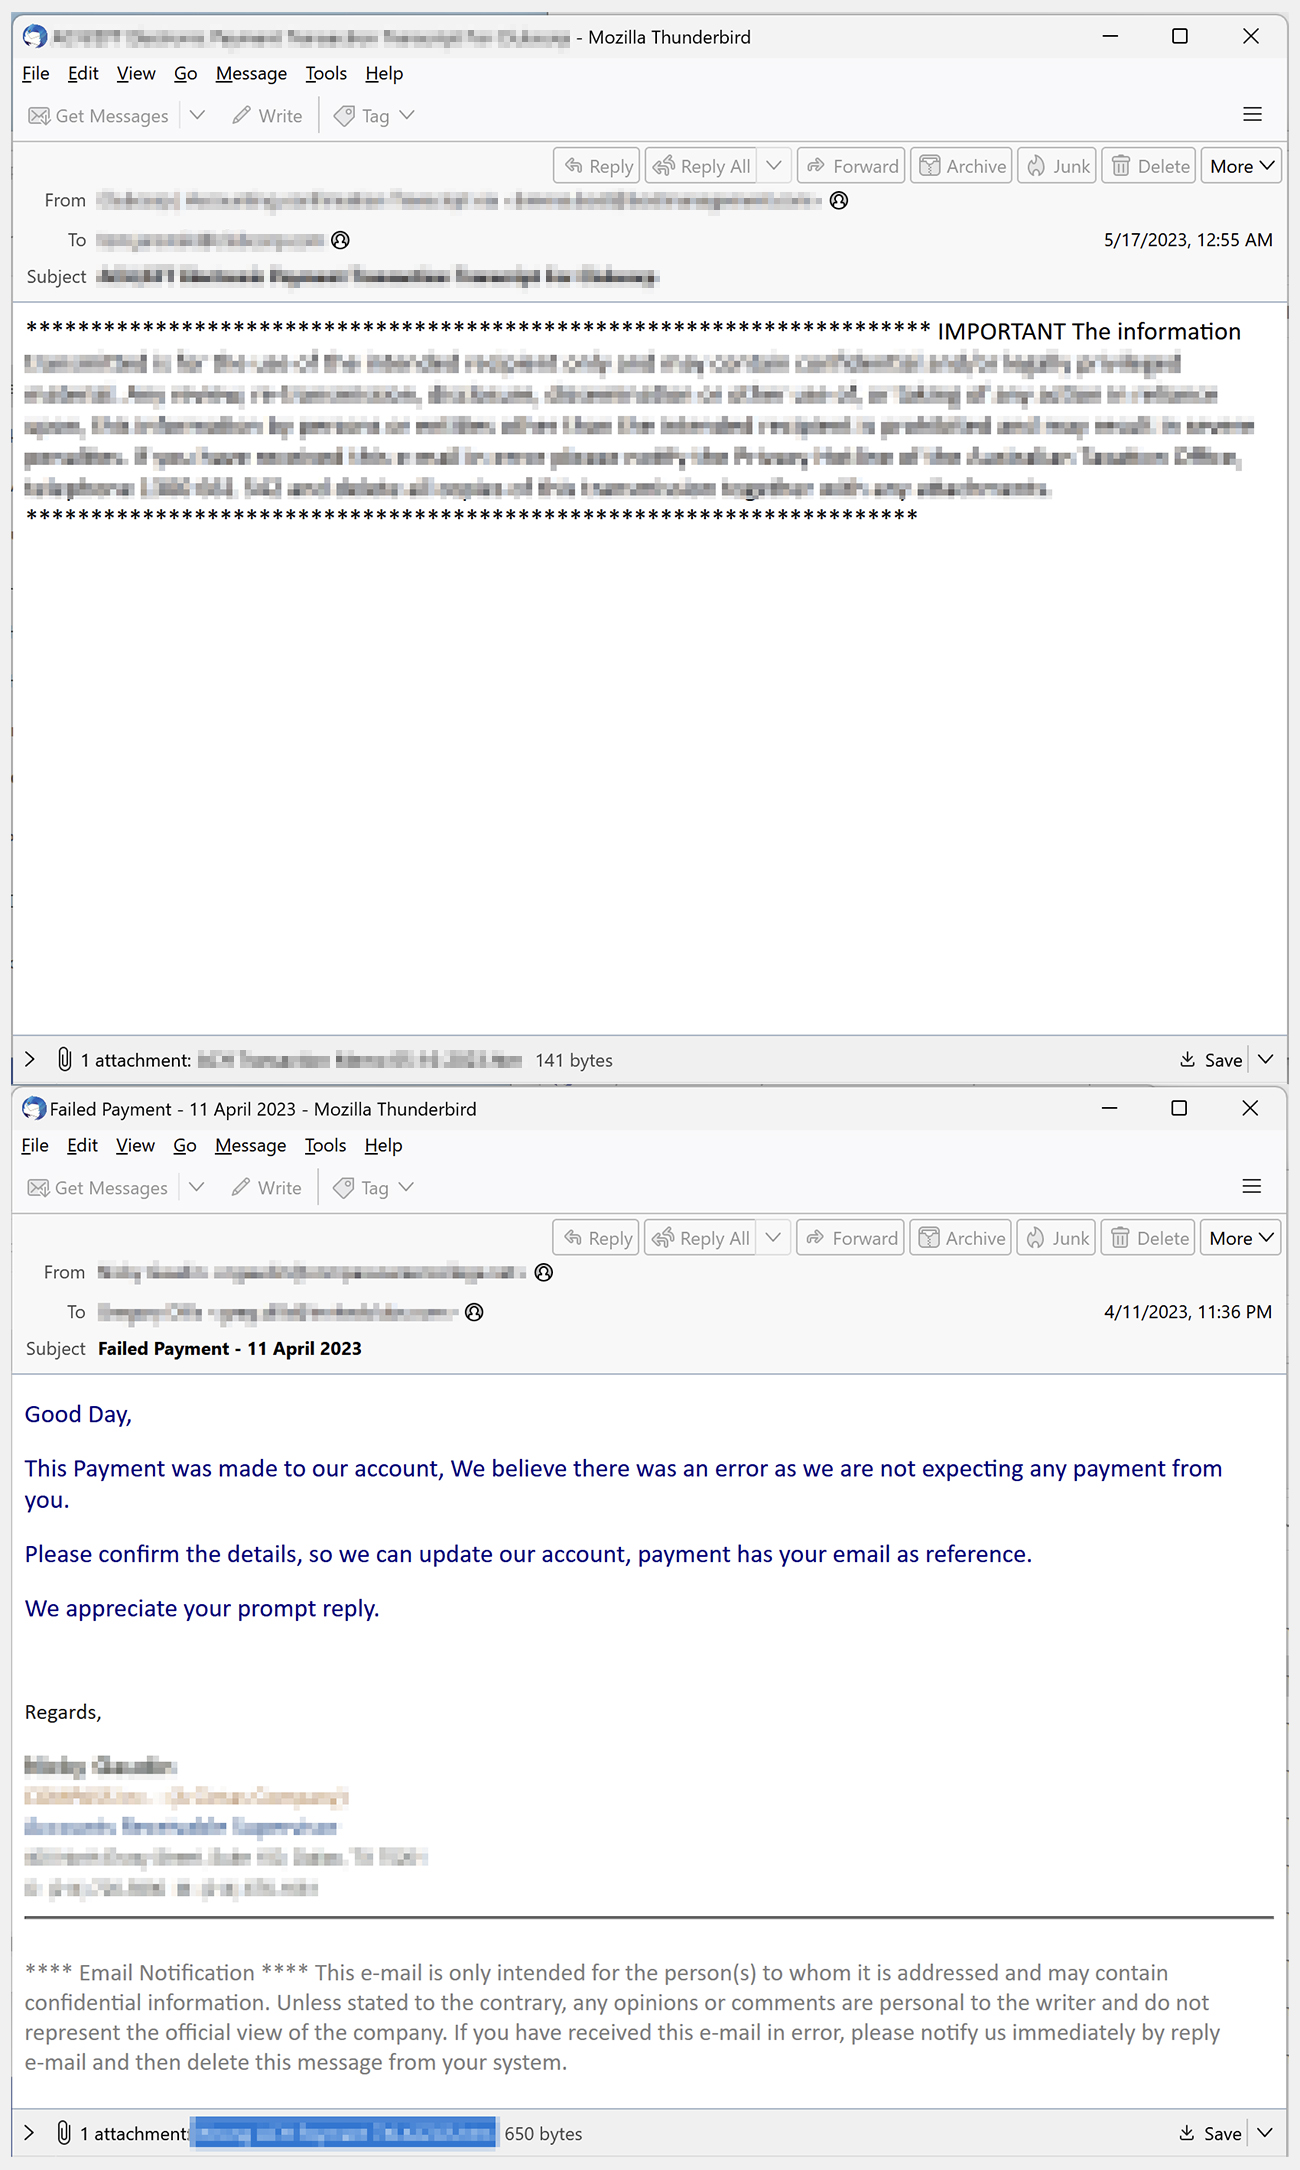 Examples of phishing emails using malicious URLs as attachments